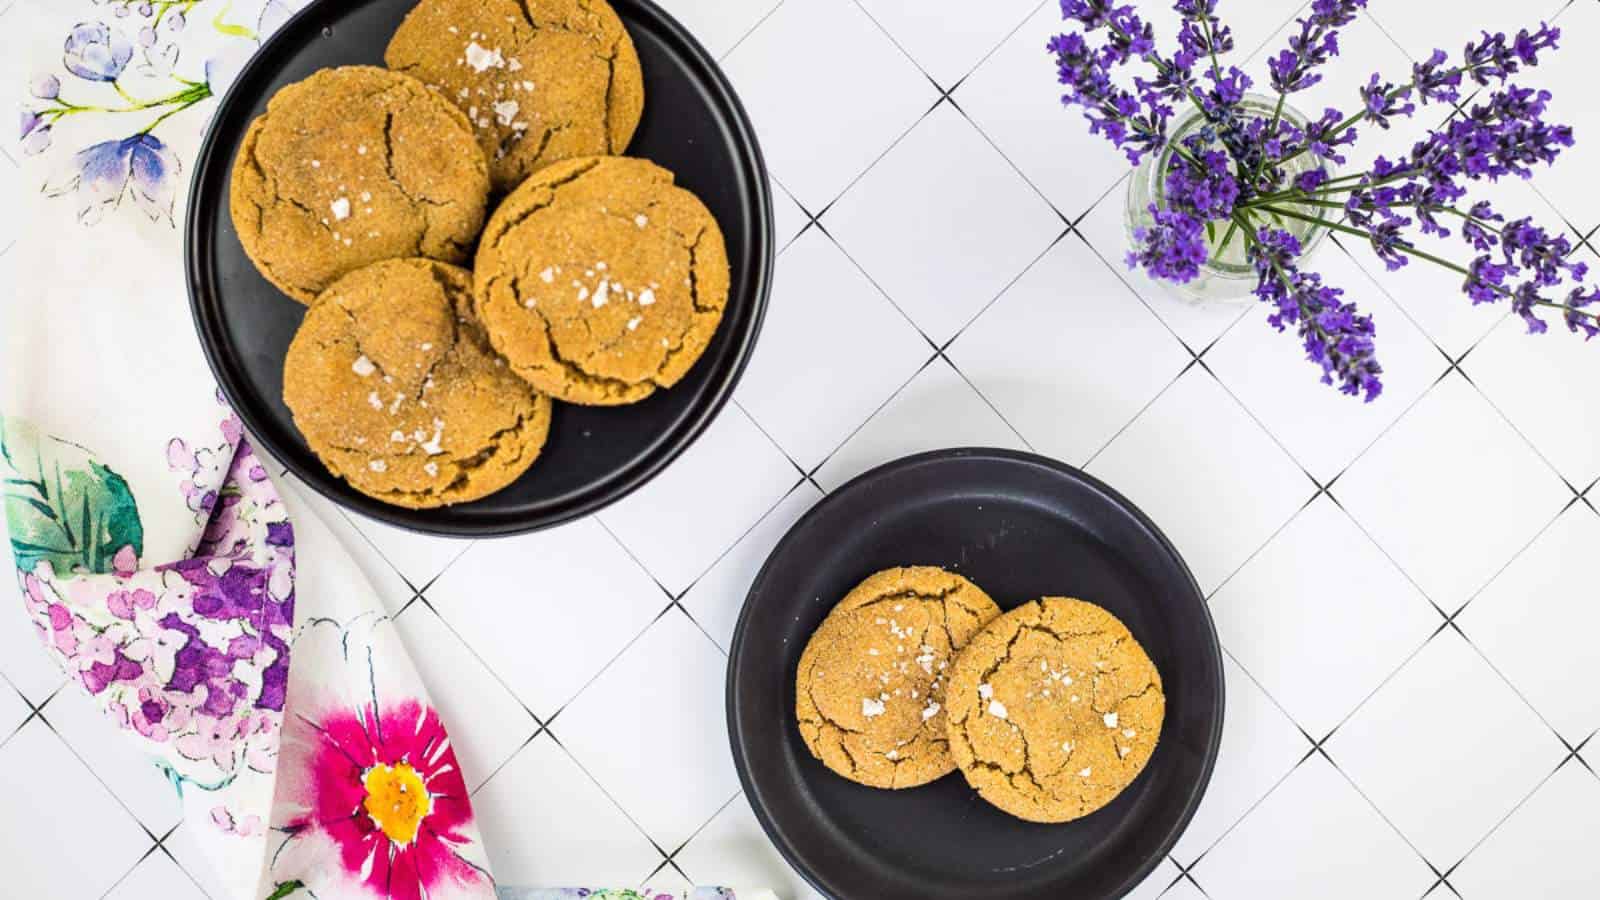 Two bowls of salted caramel snickerdoodle cookies on a plate with lavender flowers on the table.